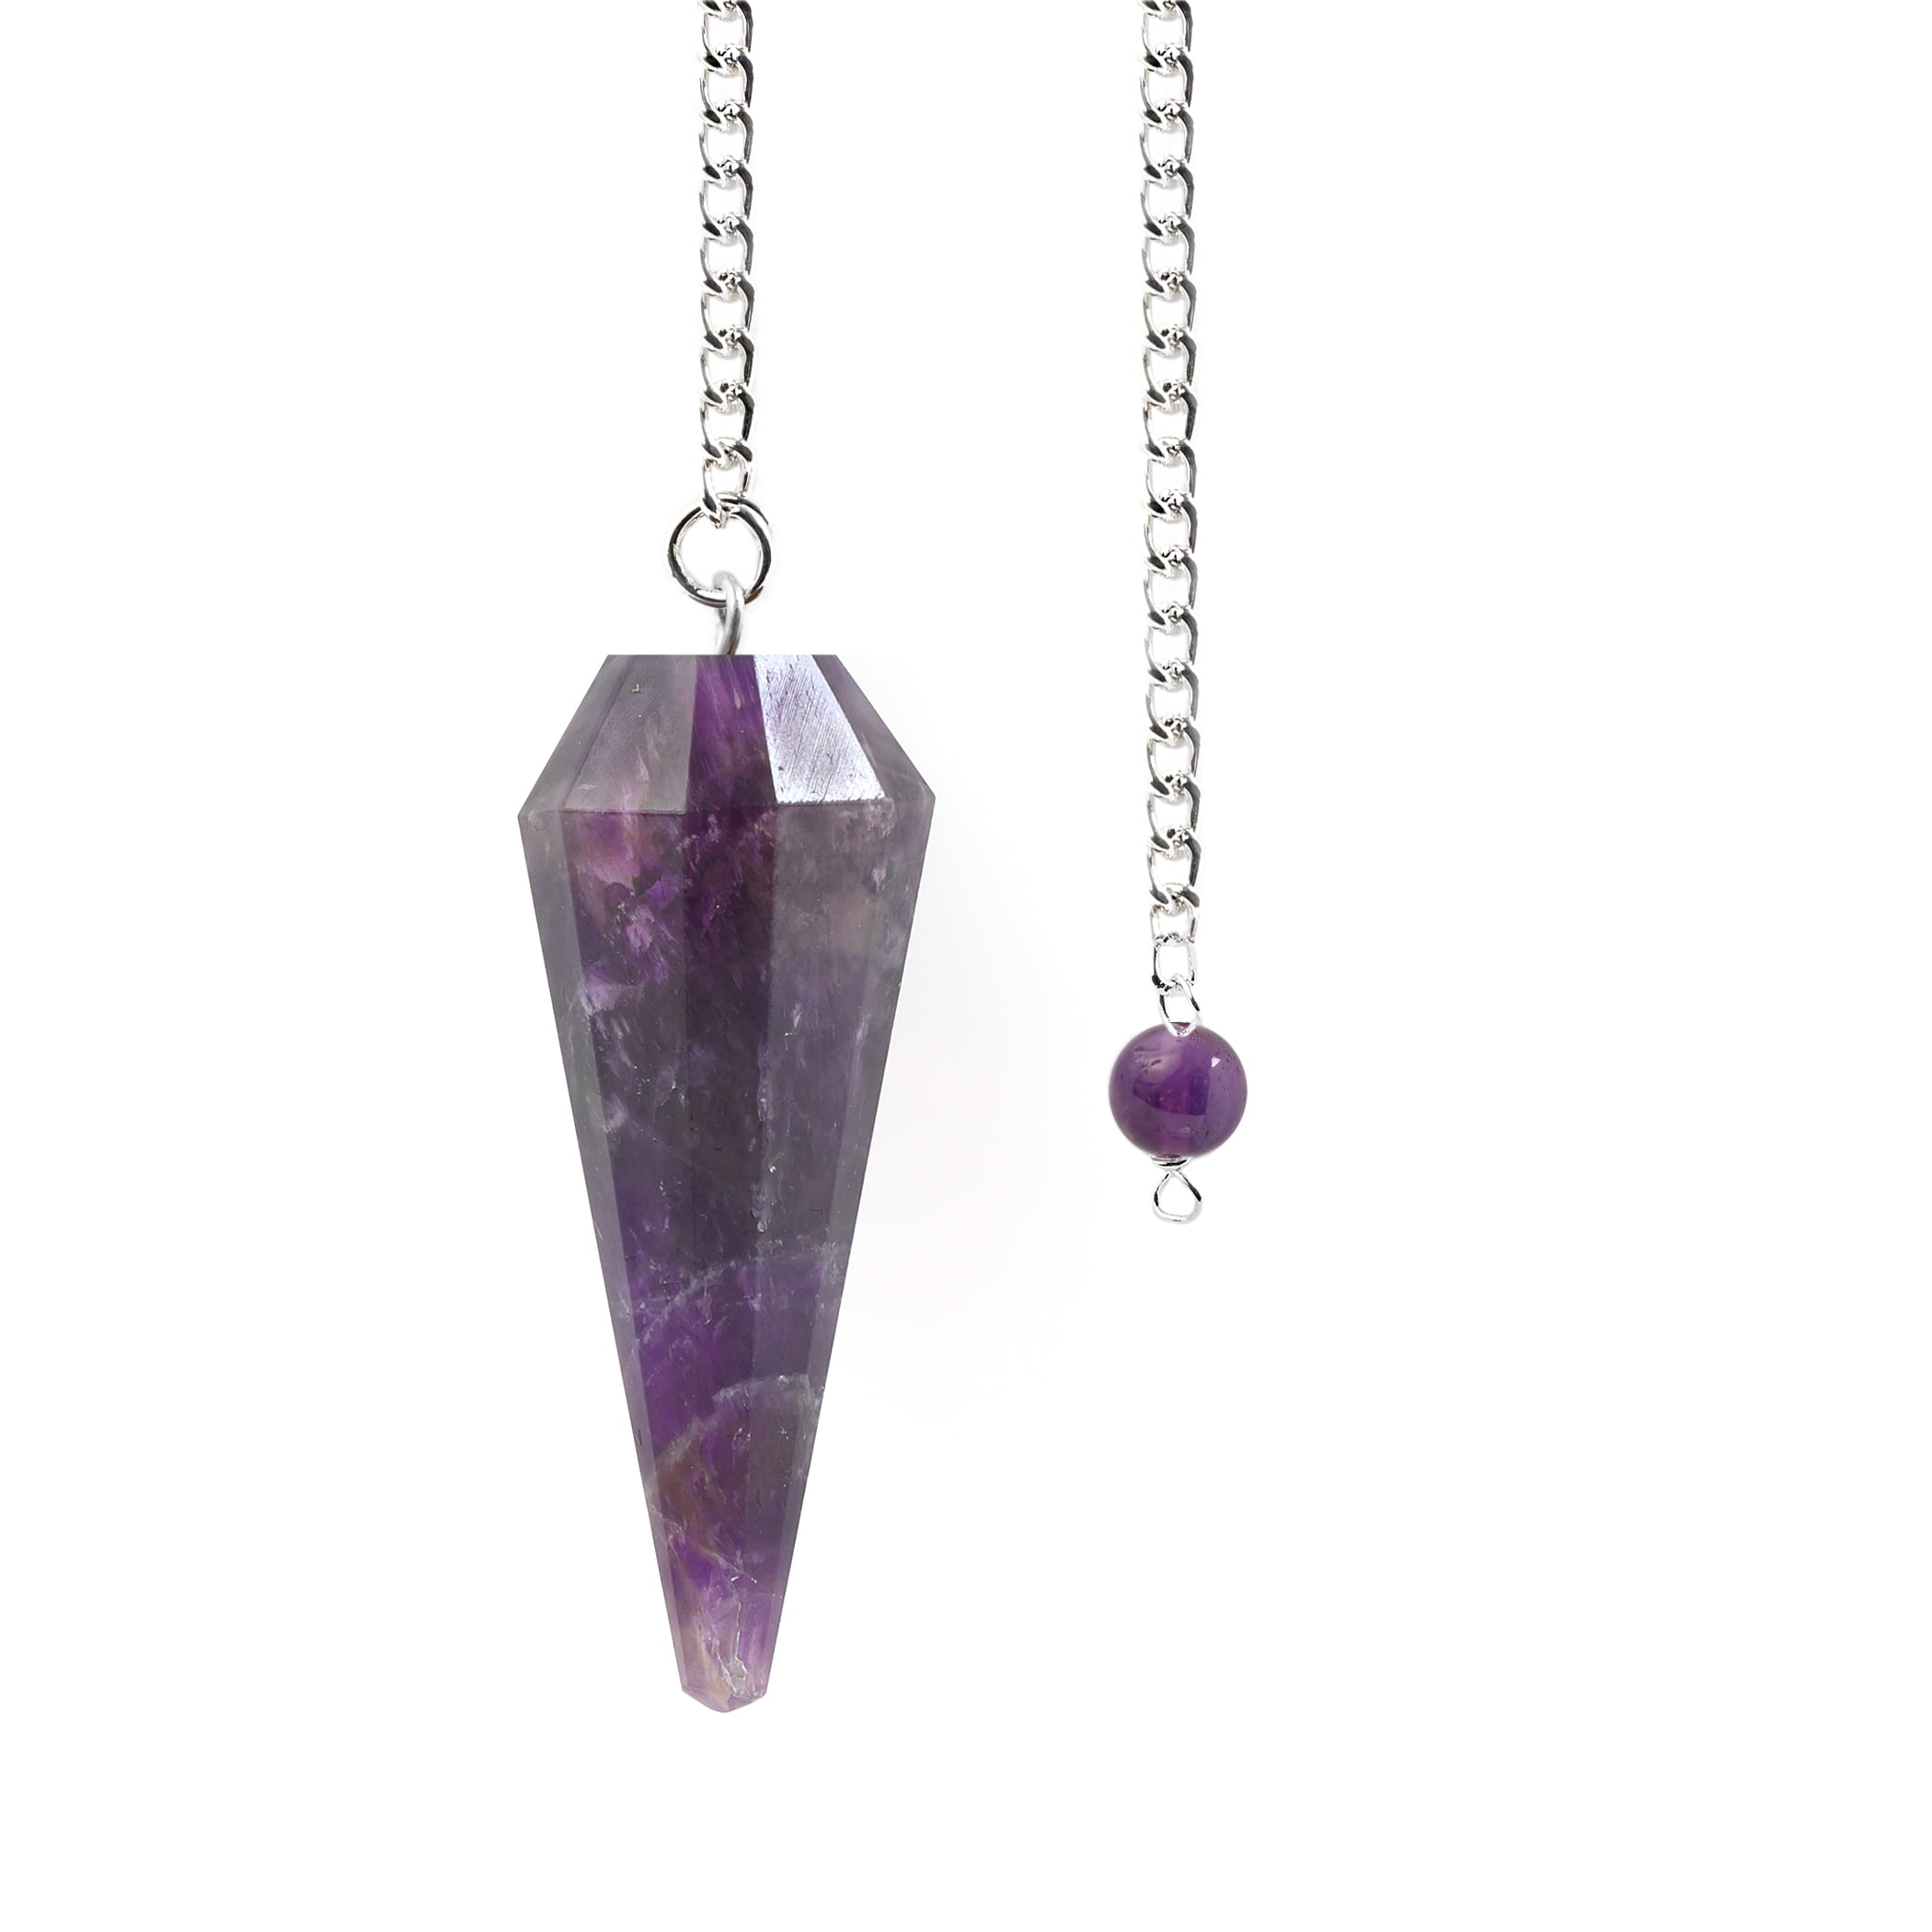 AMETHYST Natural Point Crystal with Description Healing Stone Reiki PENDANT 